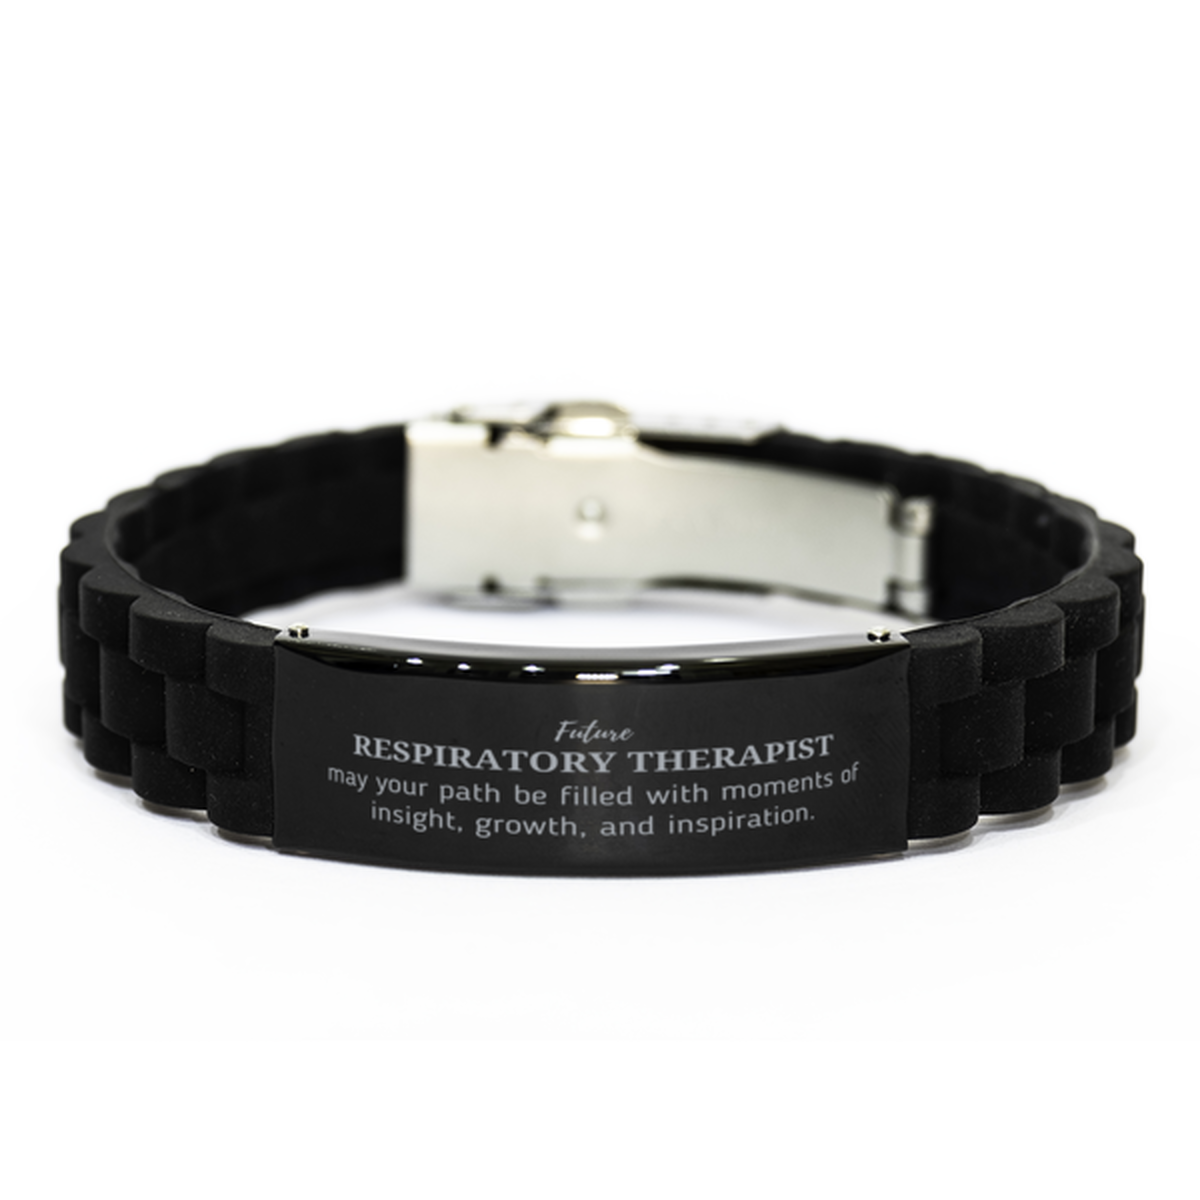 Future Respiratory Therapist Gifts, May your path be filled with moments of insight, Graduation Gifts for New Respiratory Therapist, Christmas Unique Black Glidelock Clasp Bracelet For Men, Women, Friends